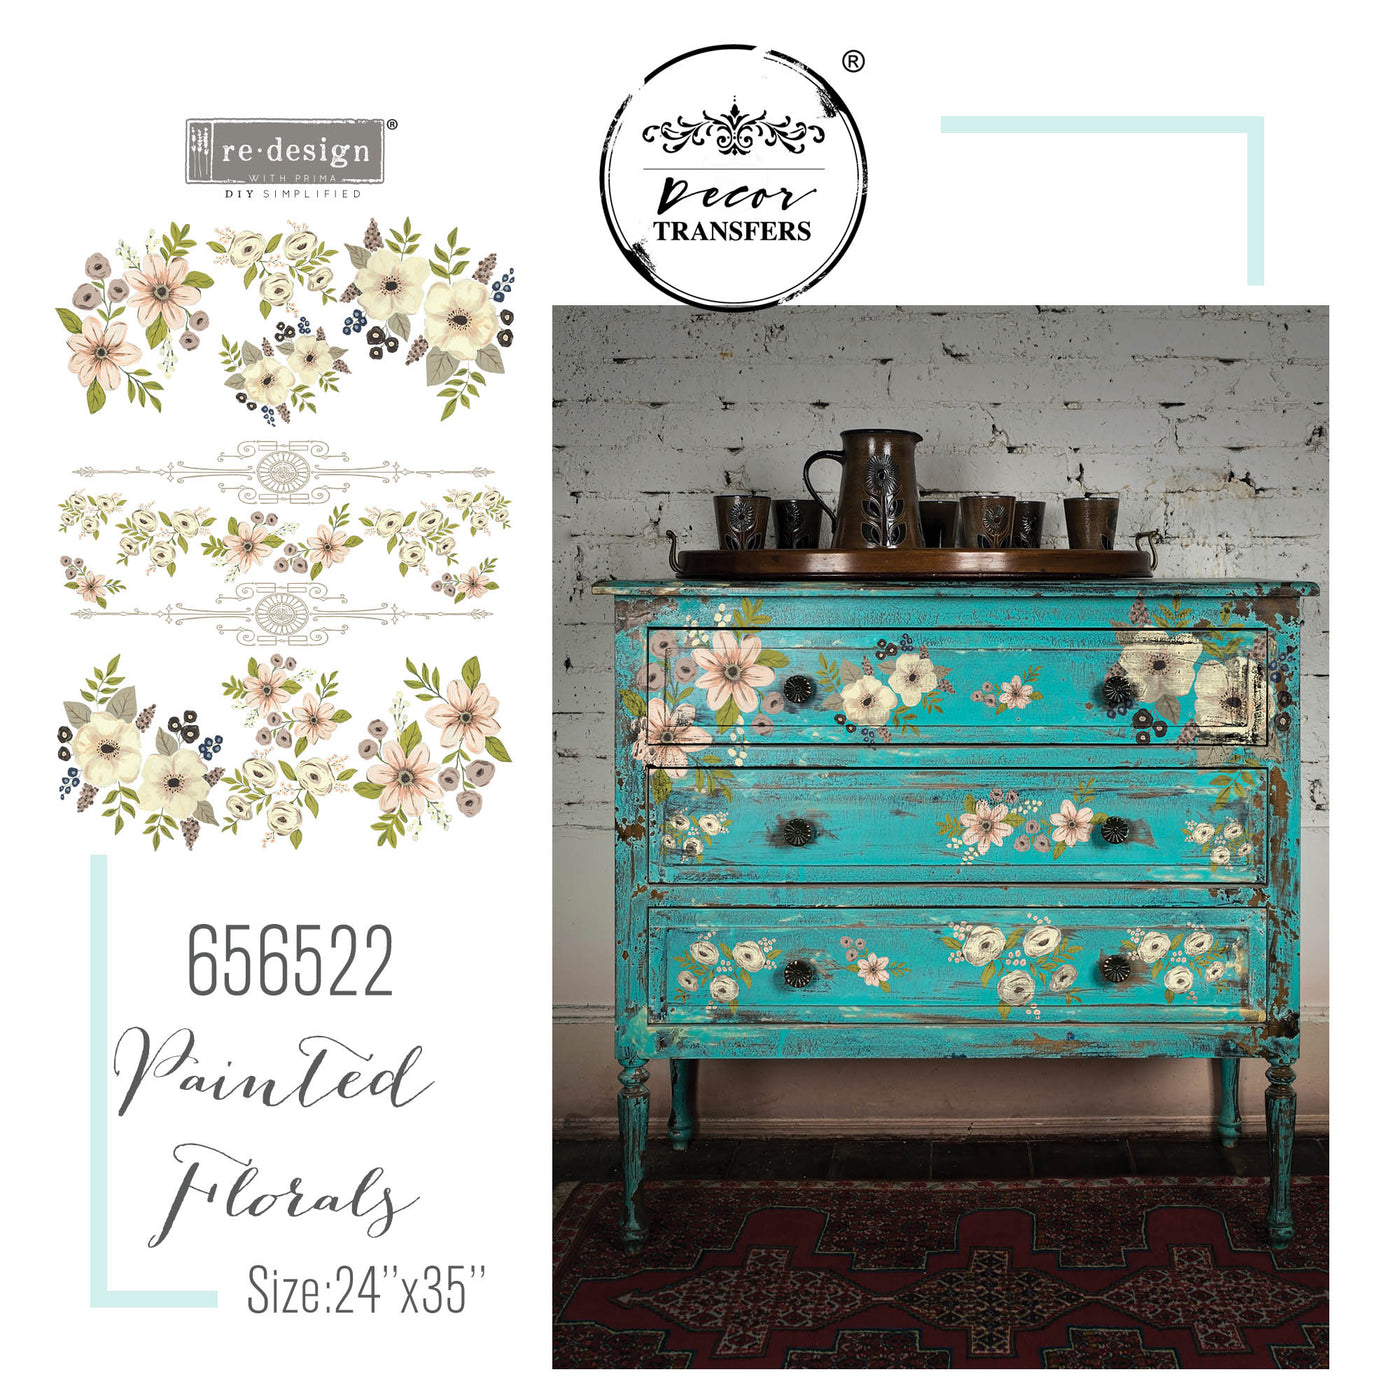 PAINTED FLORALS  -  REDESIGN DECOR TRANSFERS®